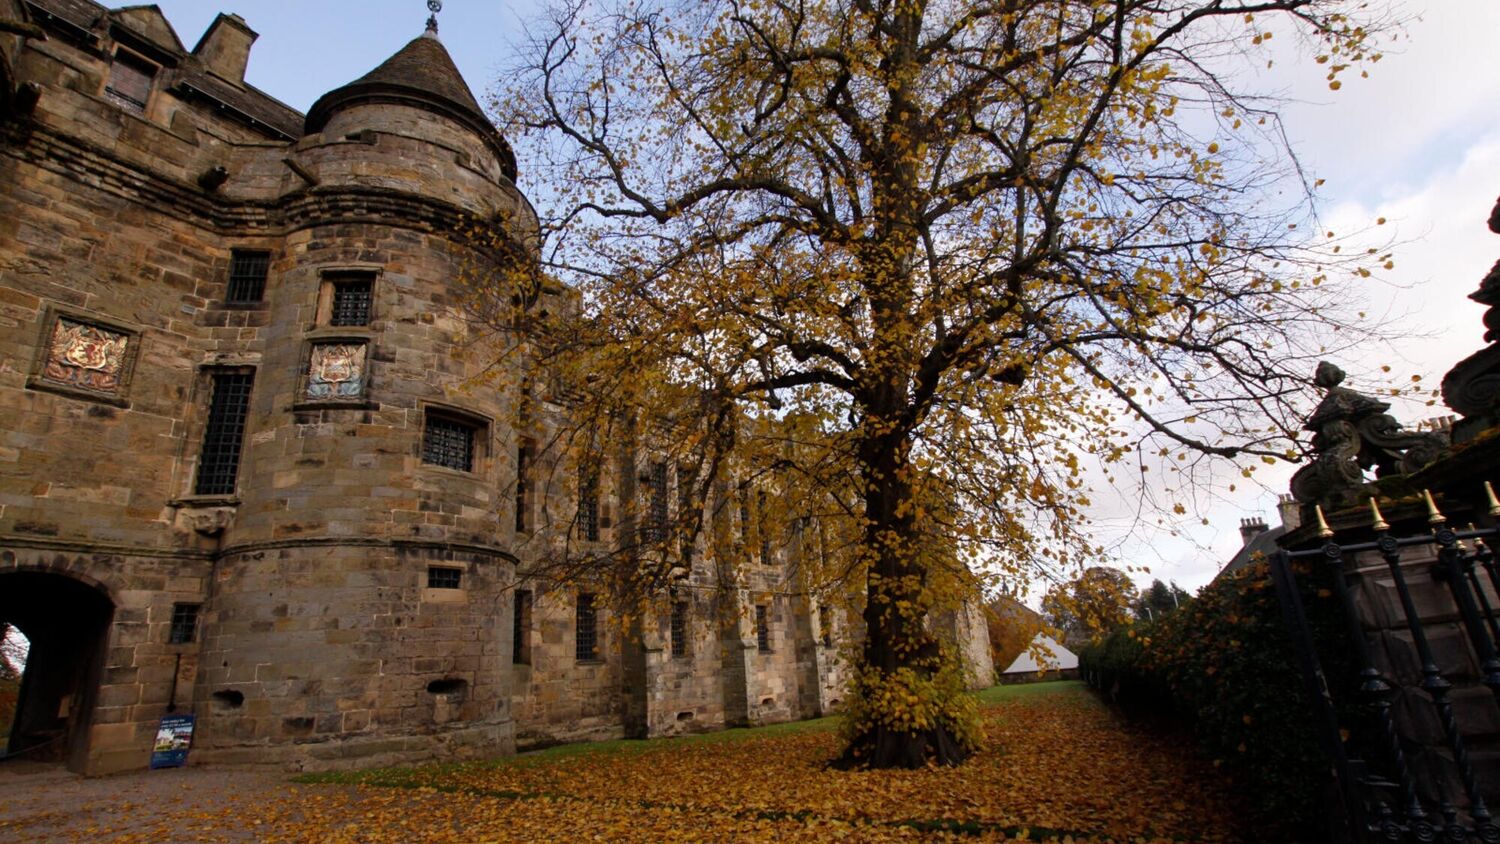 Falkland Palace in autumn, with a large tree in front, its leaves on the ground.